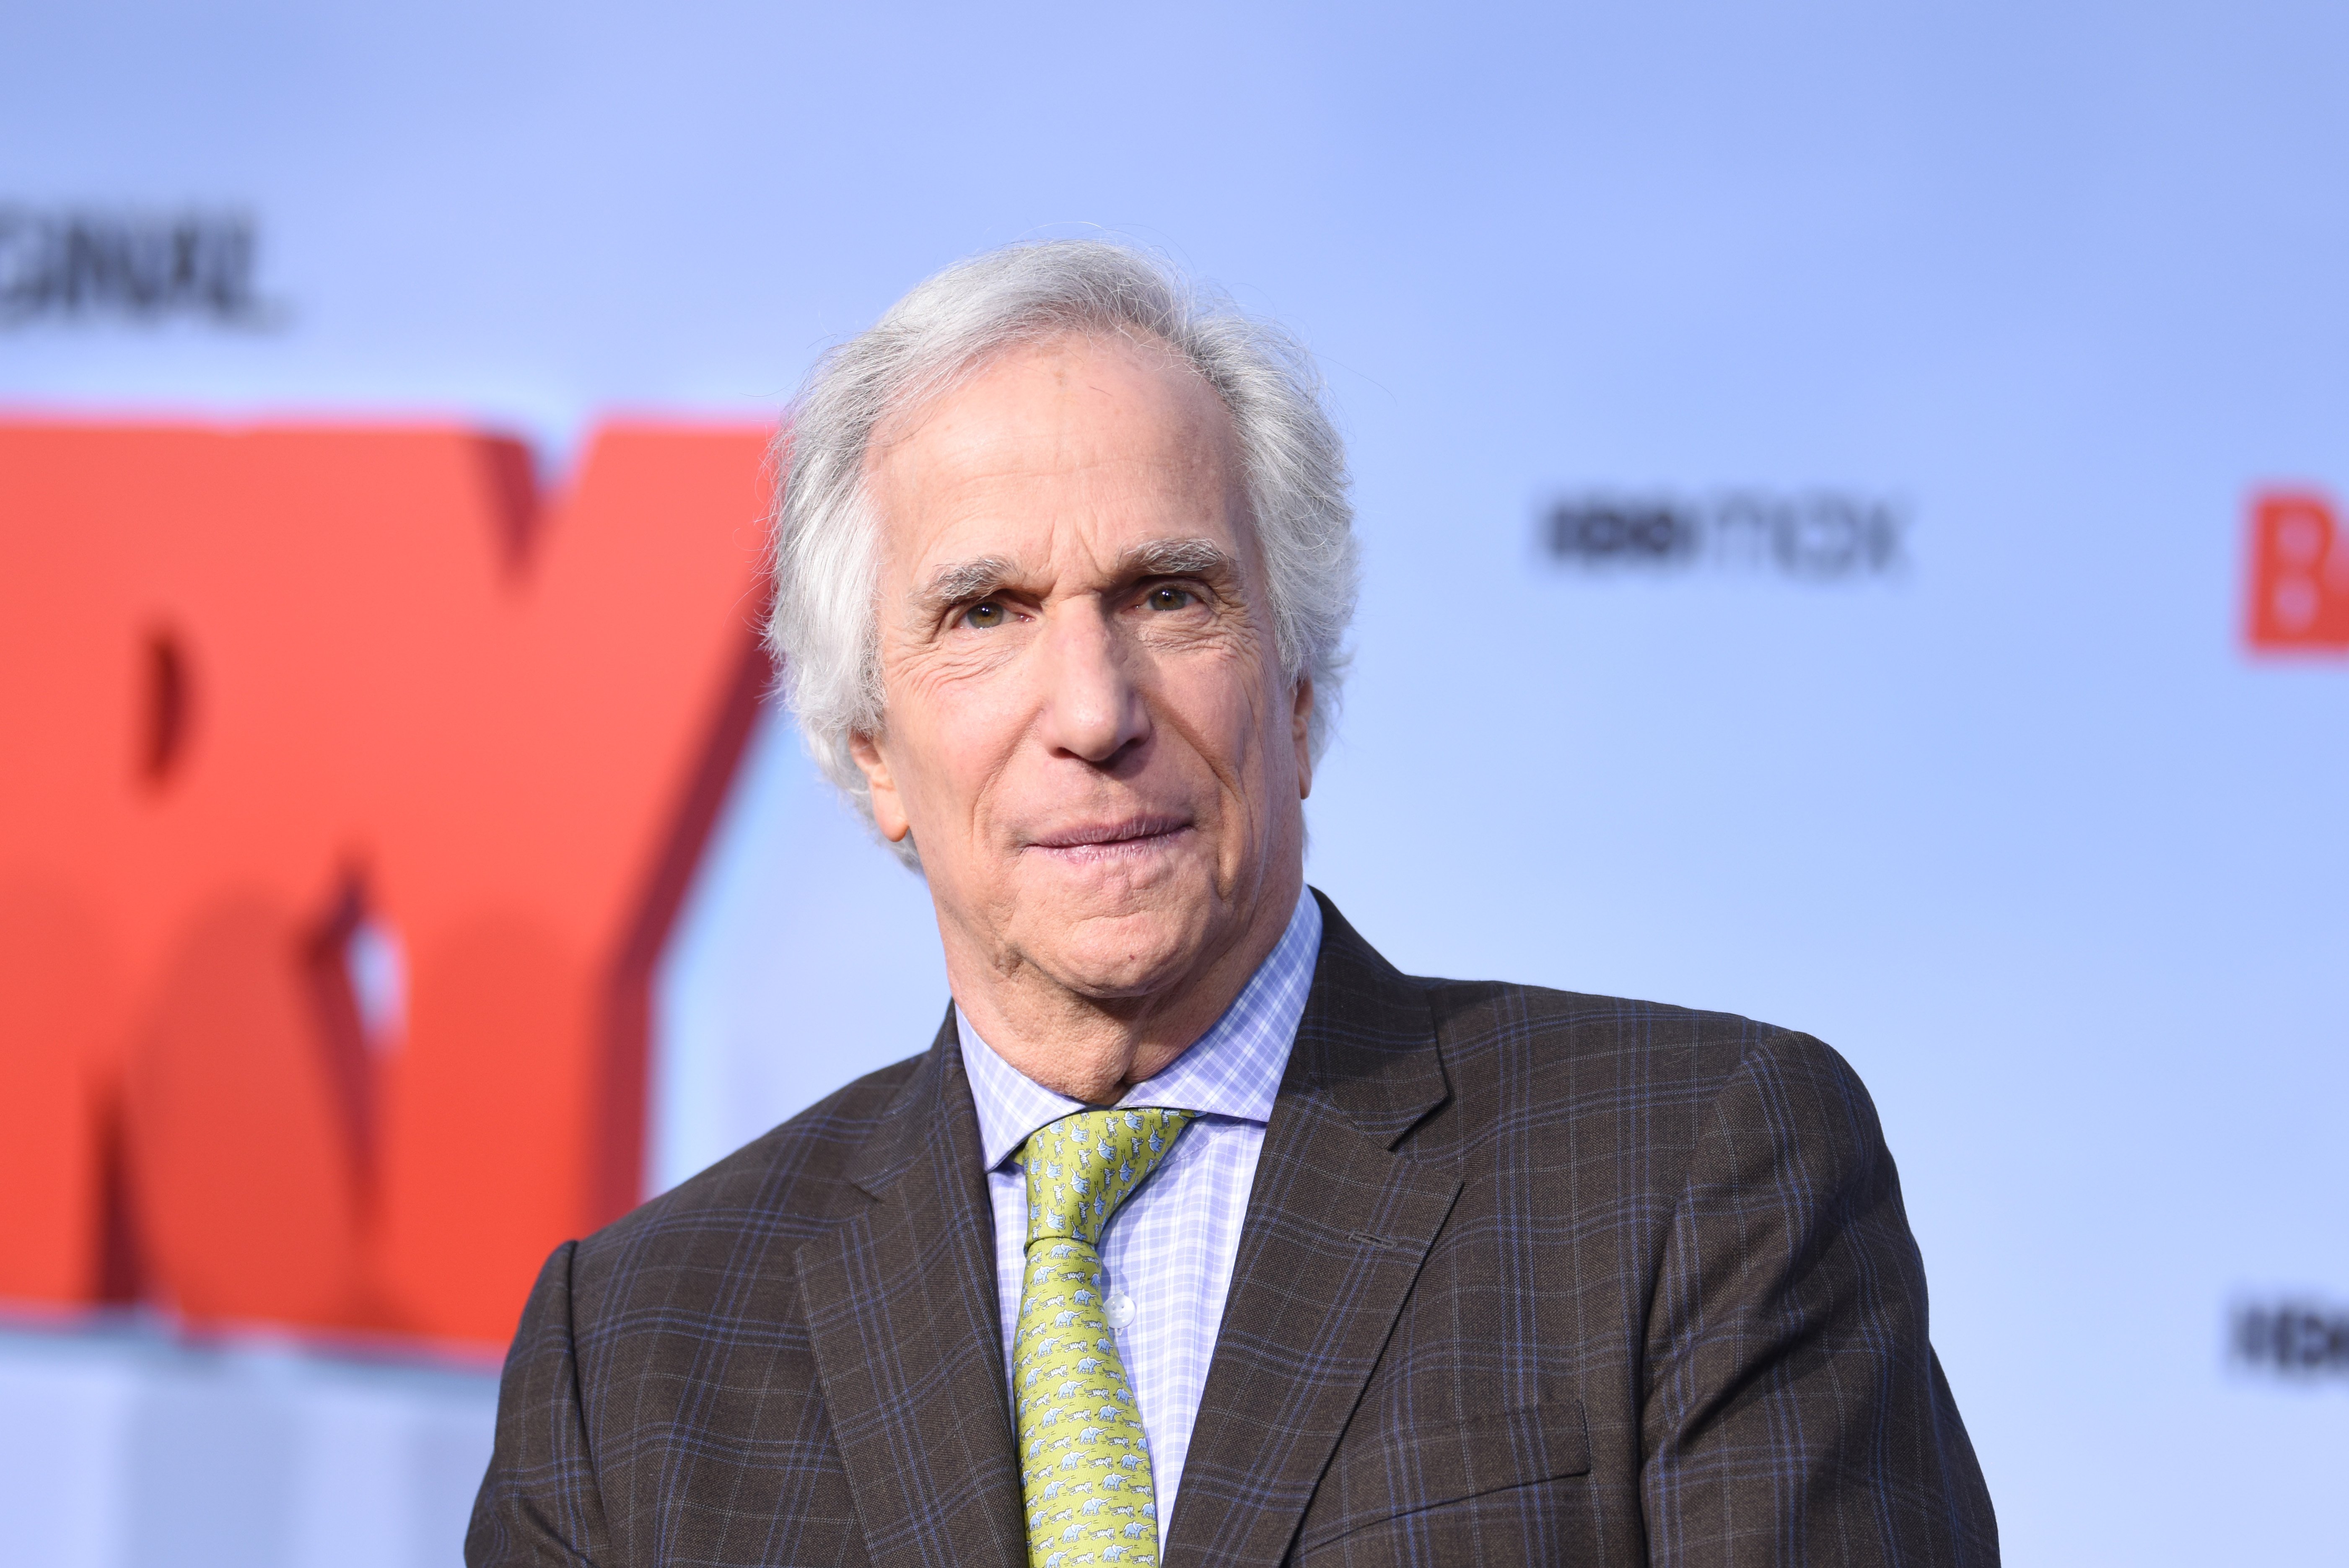 Henry Winkler attending the Season 3 premiere of HBO's "Barry" at Rolling Greens on April 18, 2022 in Culver City, California. | Source: Getty Images